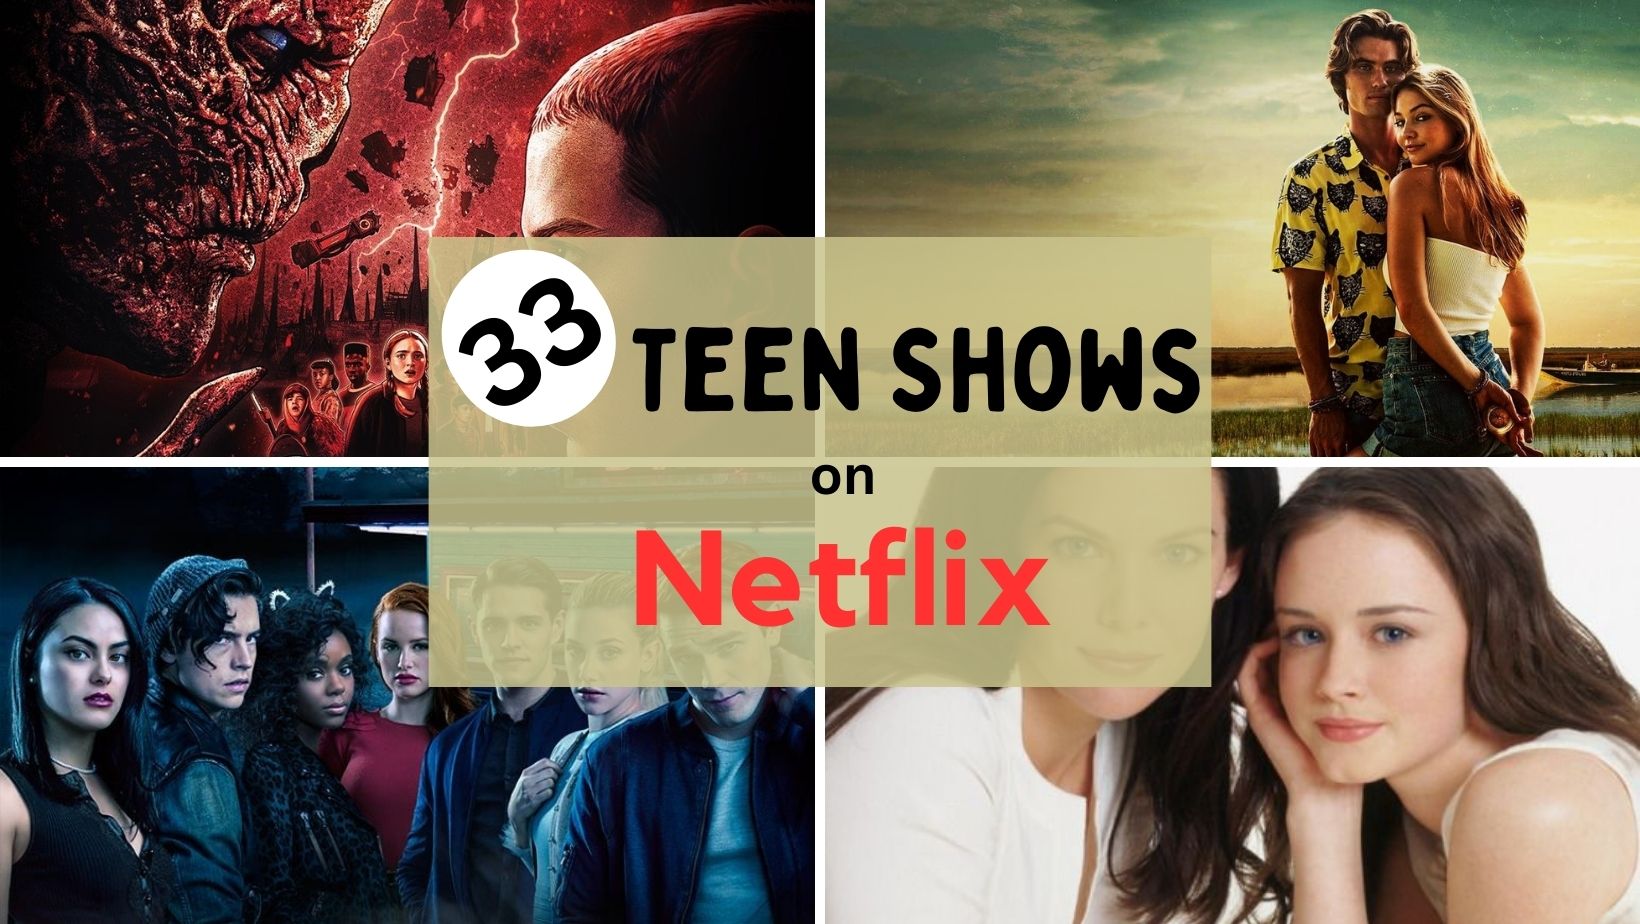 images from shows "gilmore girls", "outer banks", "stranger things" and "riverdale". text "33 teen shows on netflix"